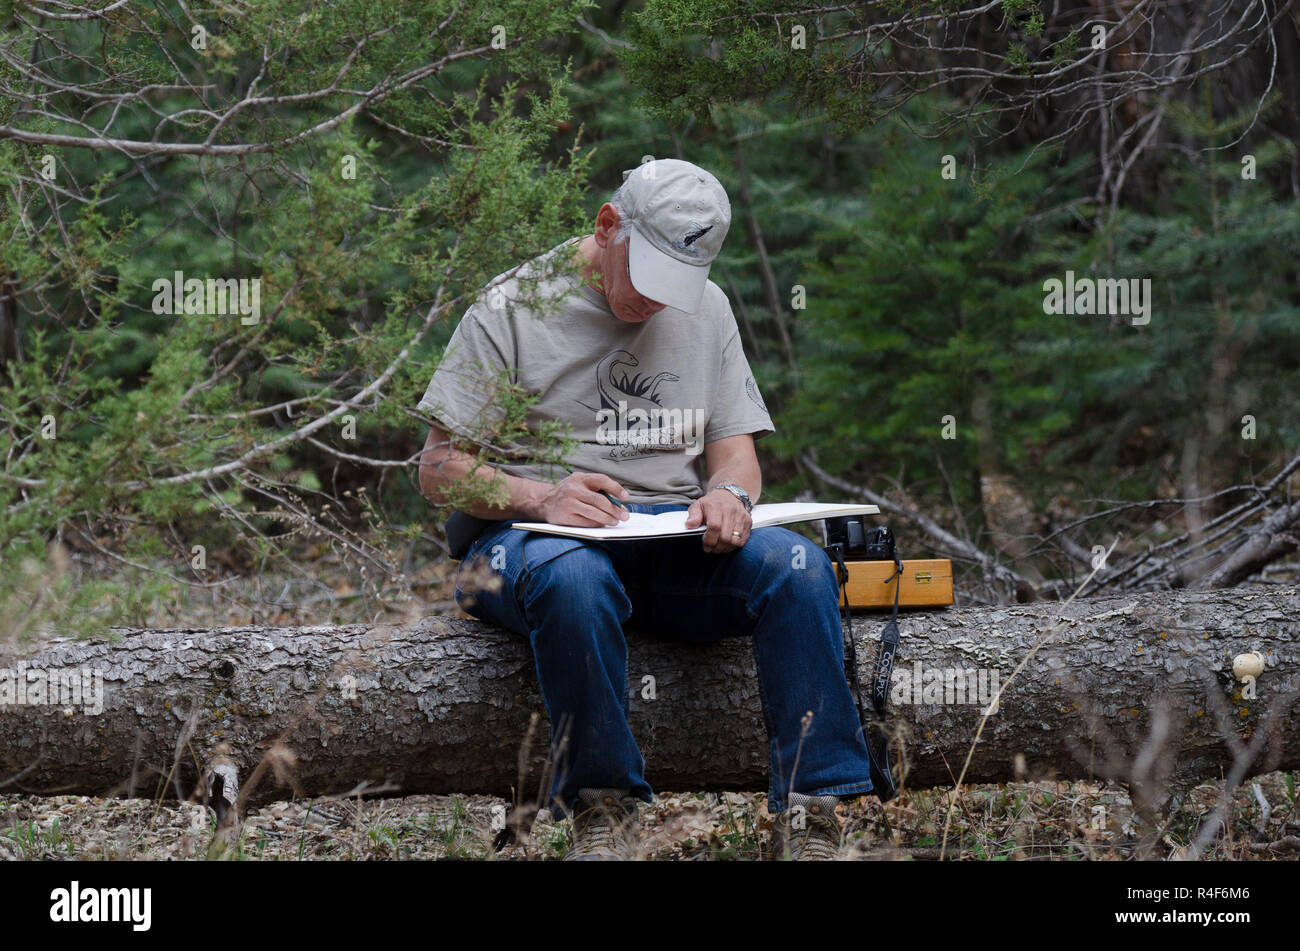 Man sitting on log in the wilderness sketching on a pad in the Sandia Mountains near Albuquerque New Mexico Stock Photo